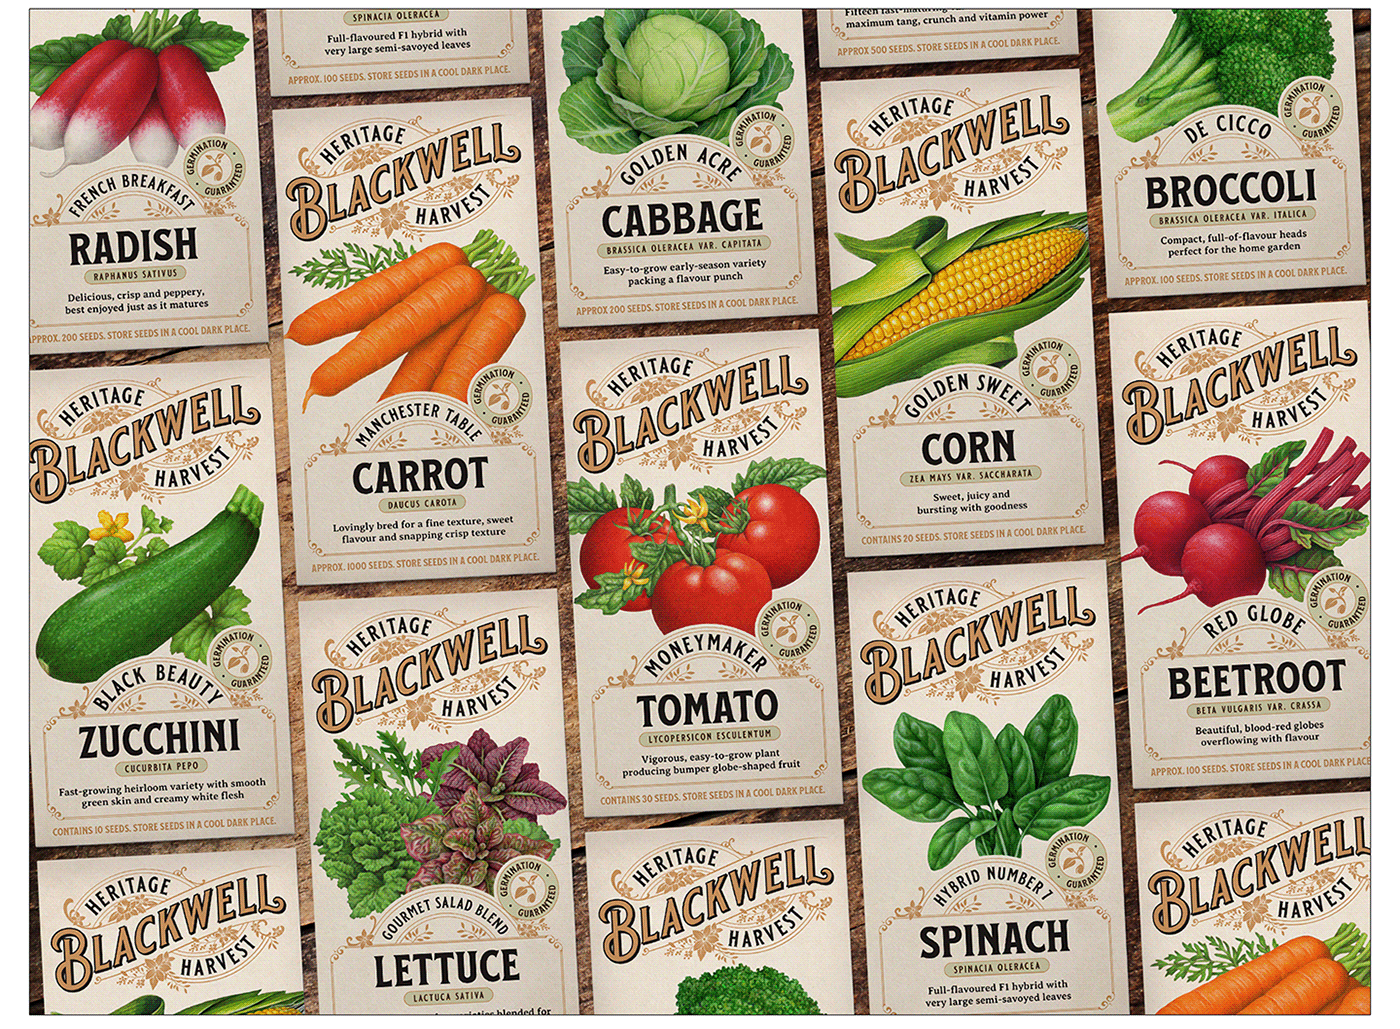 Seed packet packaging featuring old fashioned vegetable illustrations.